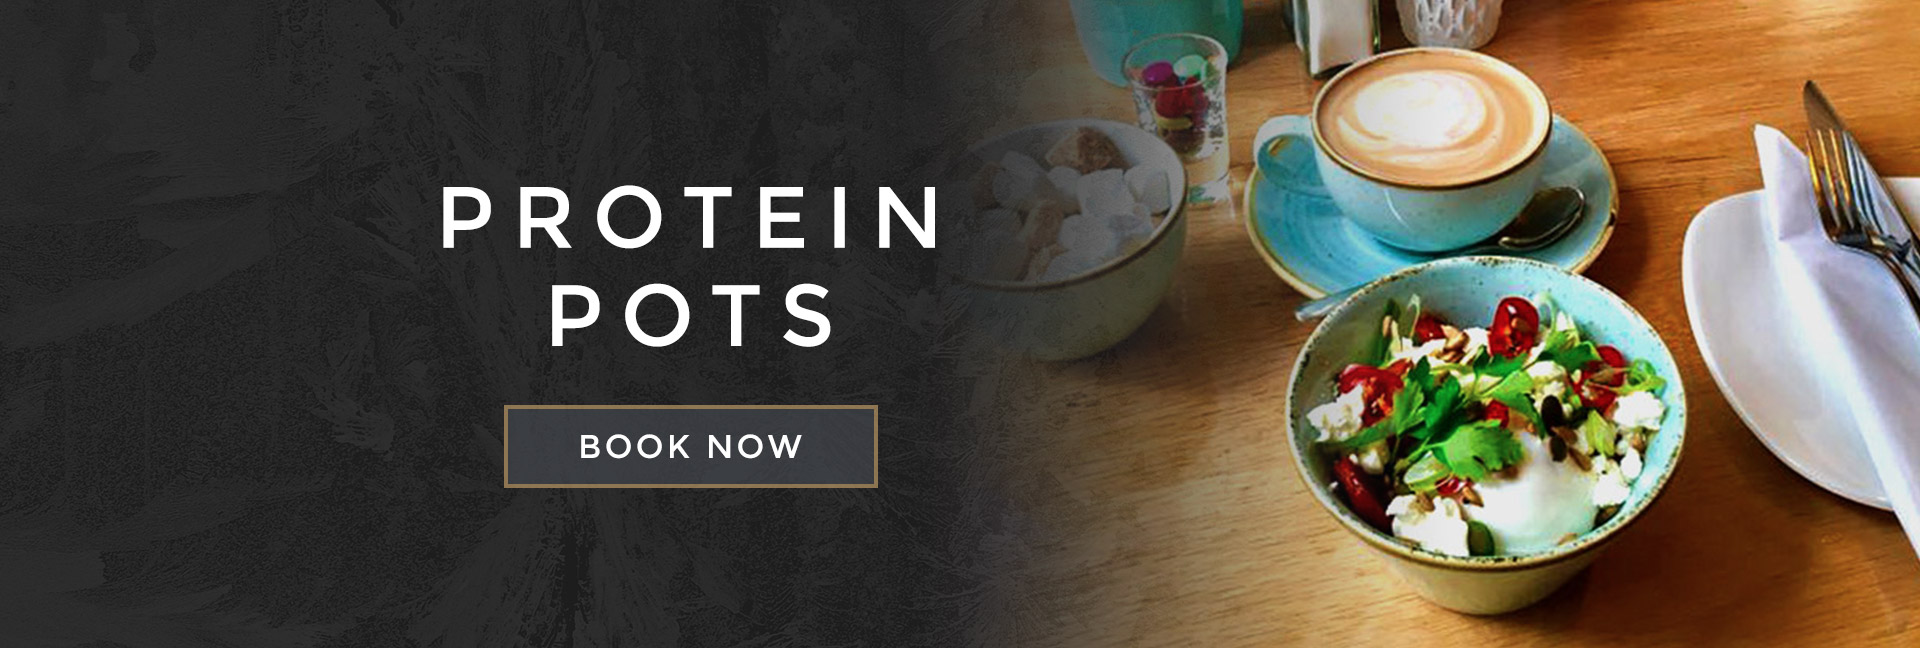 Protein pots at All Bar One Charing Cross - Book your table